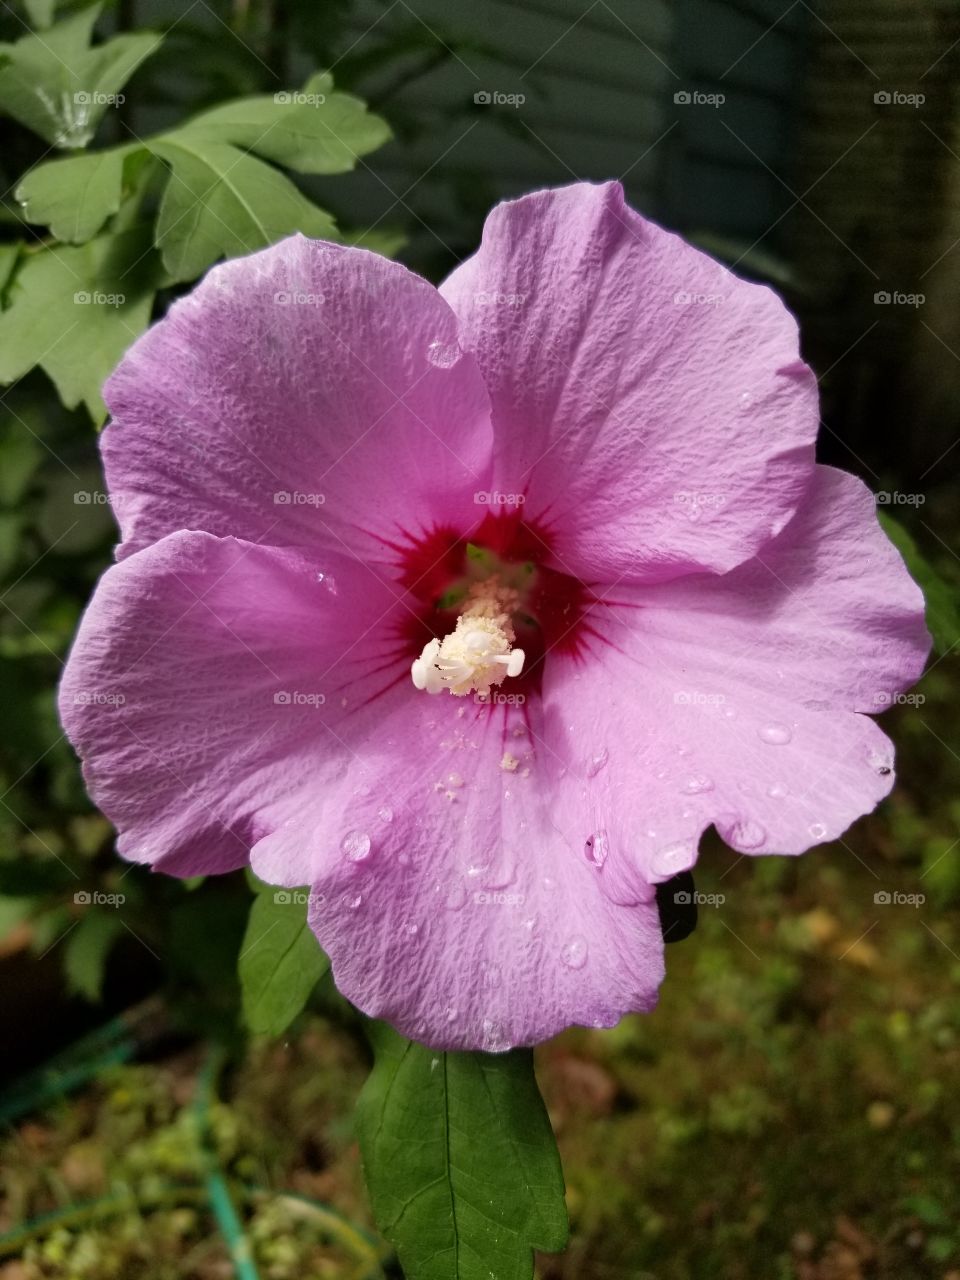 hibiscus after the sunshower